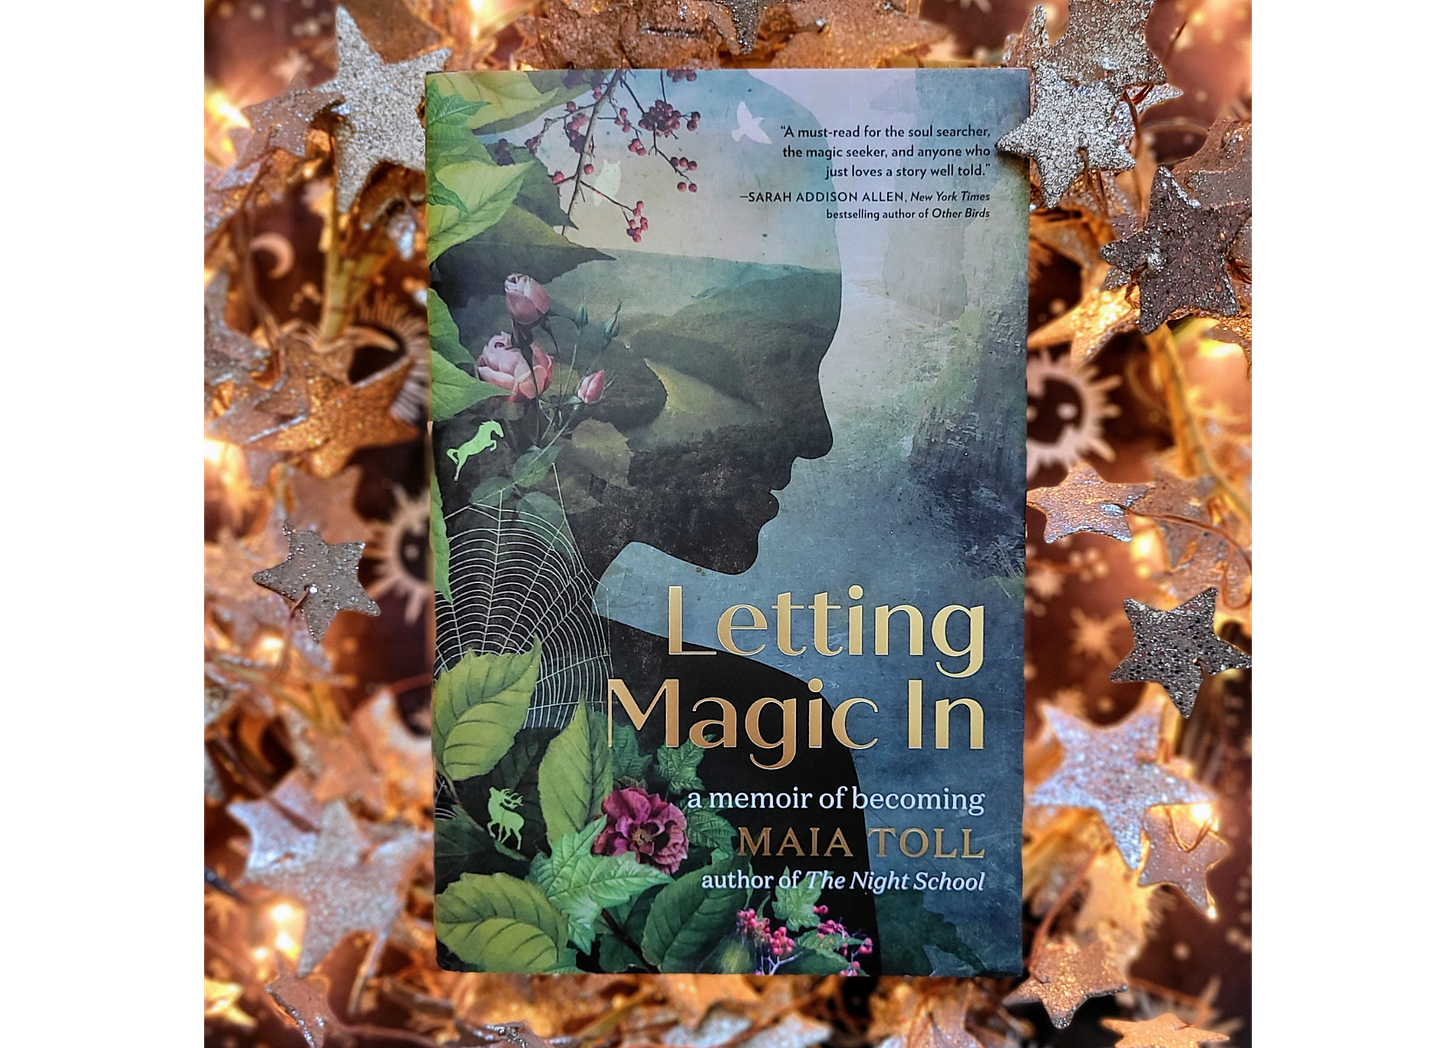 Letting Magic In: a memoir of becoming by Maia Toll, author of The Night School